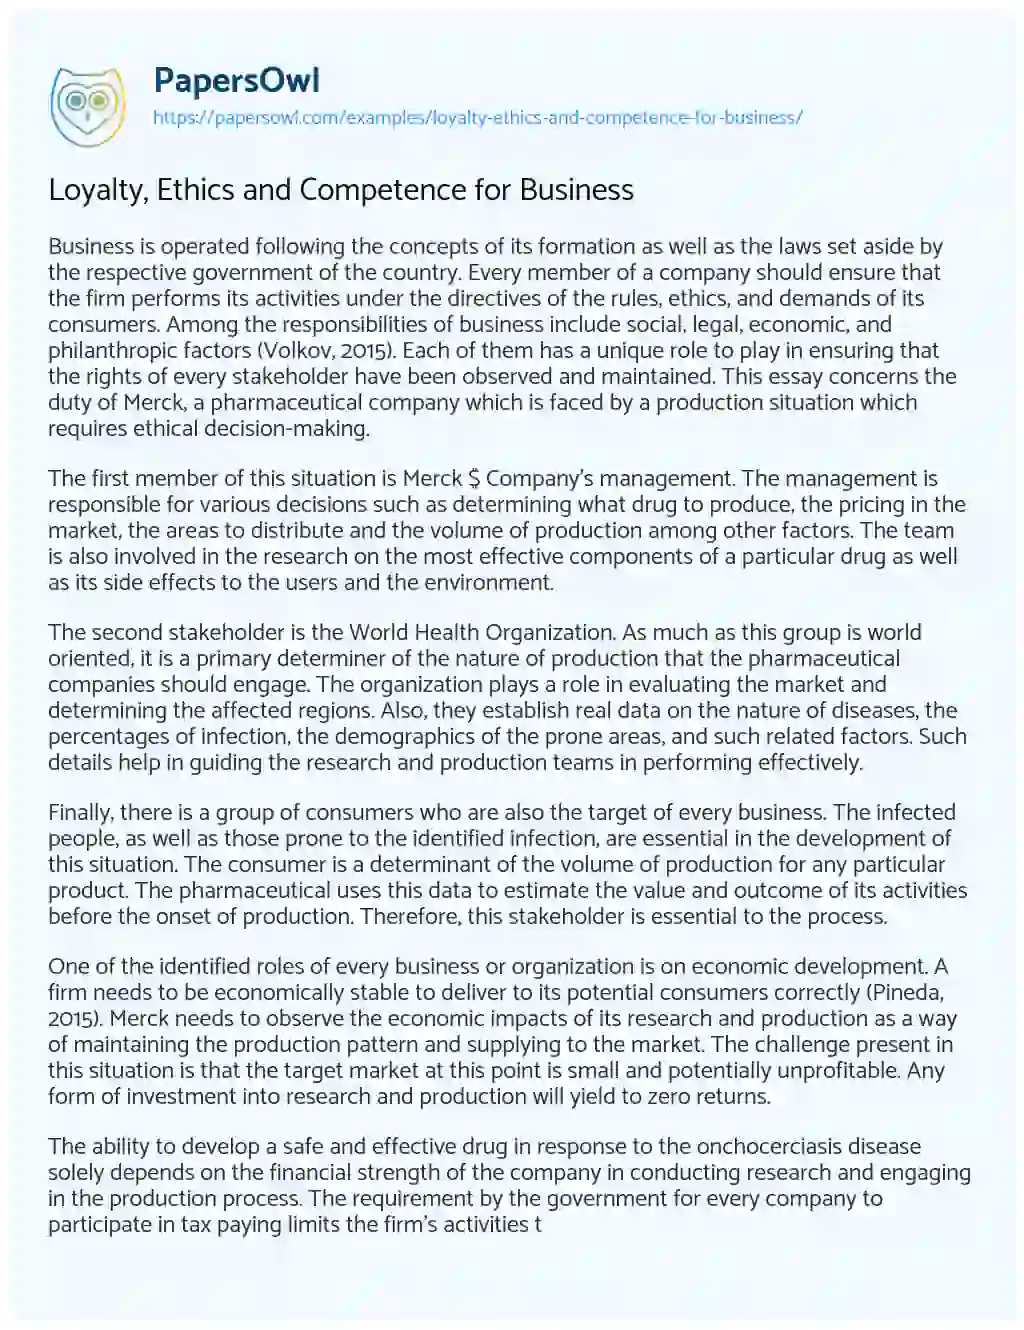 Essay on Loyalty, Ethics and Competence for Business